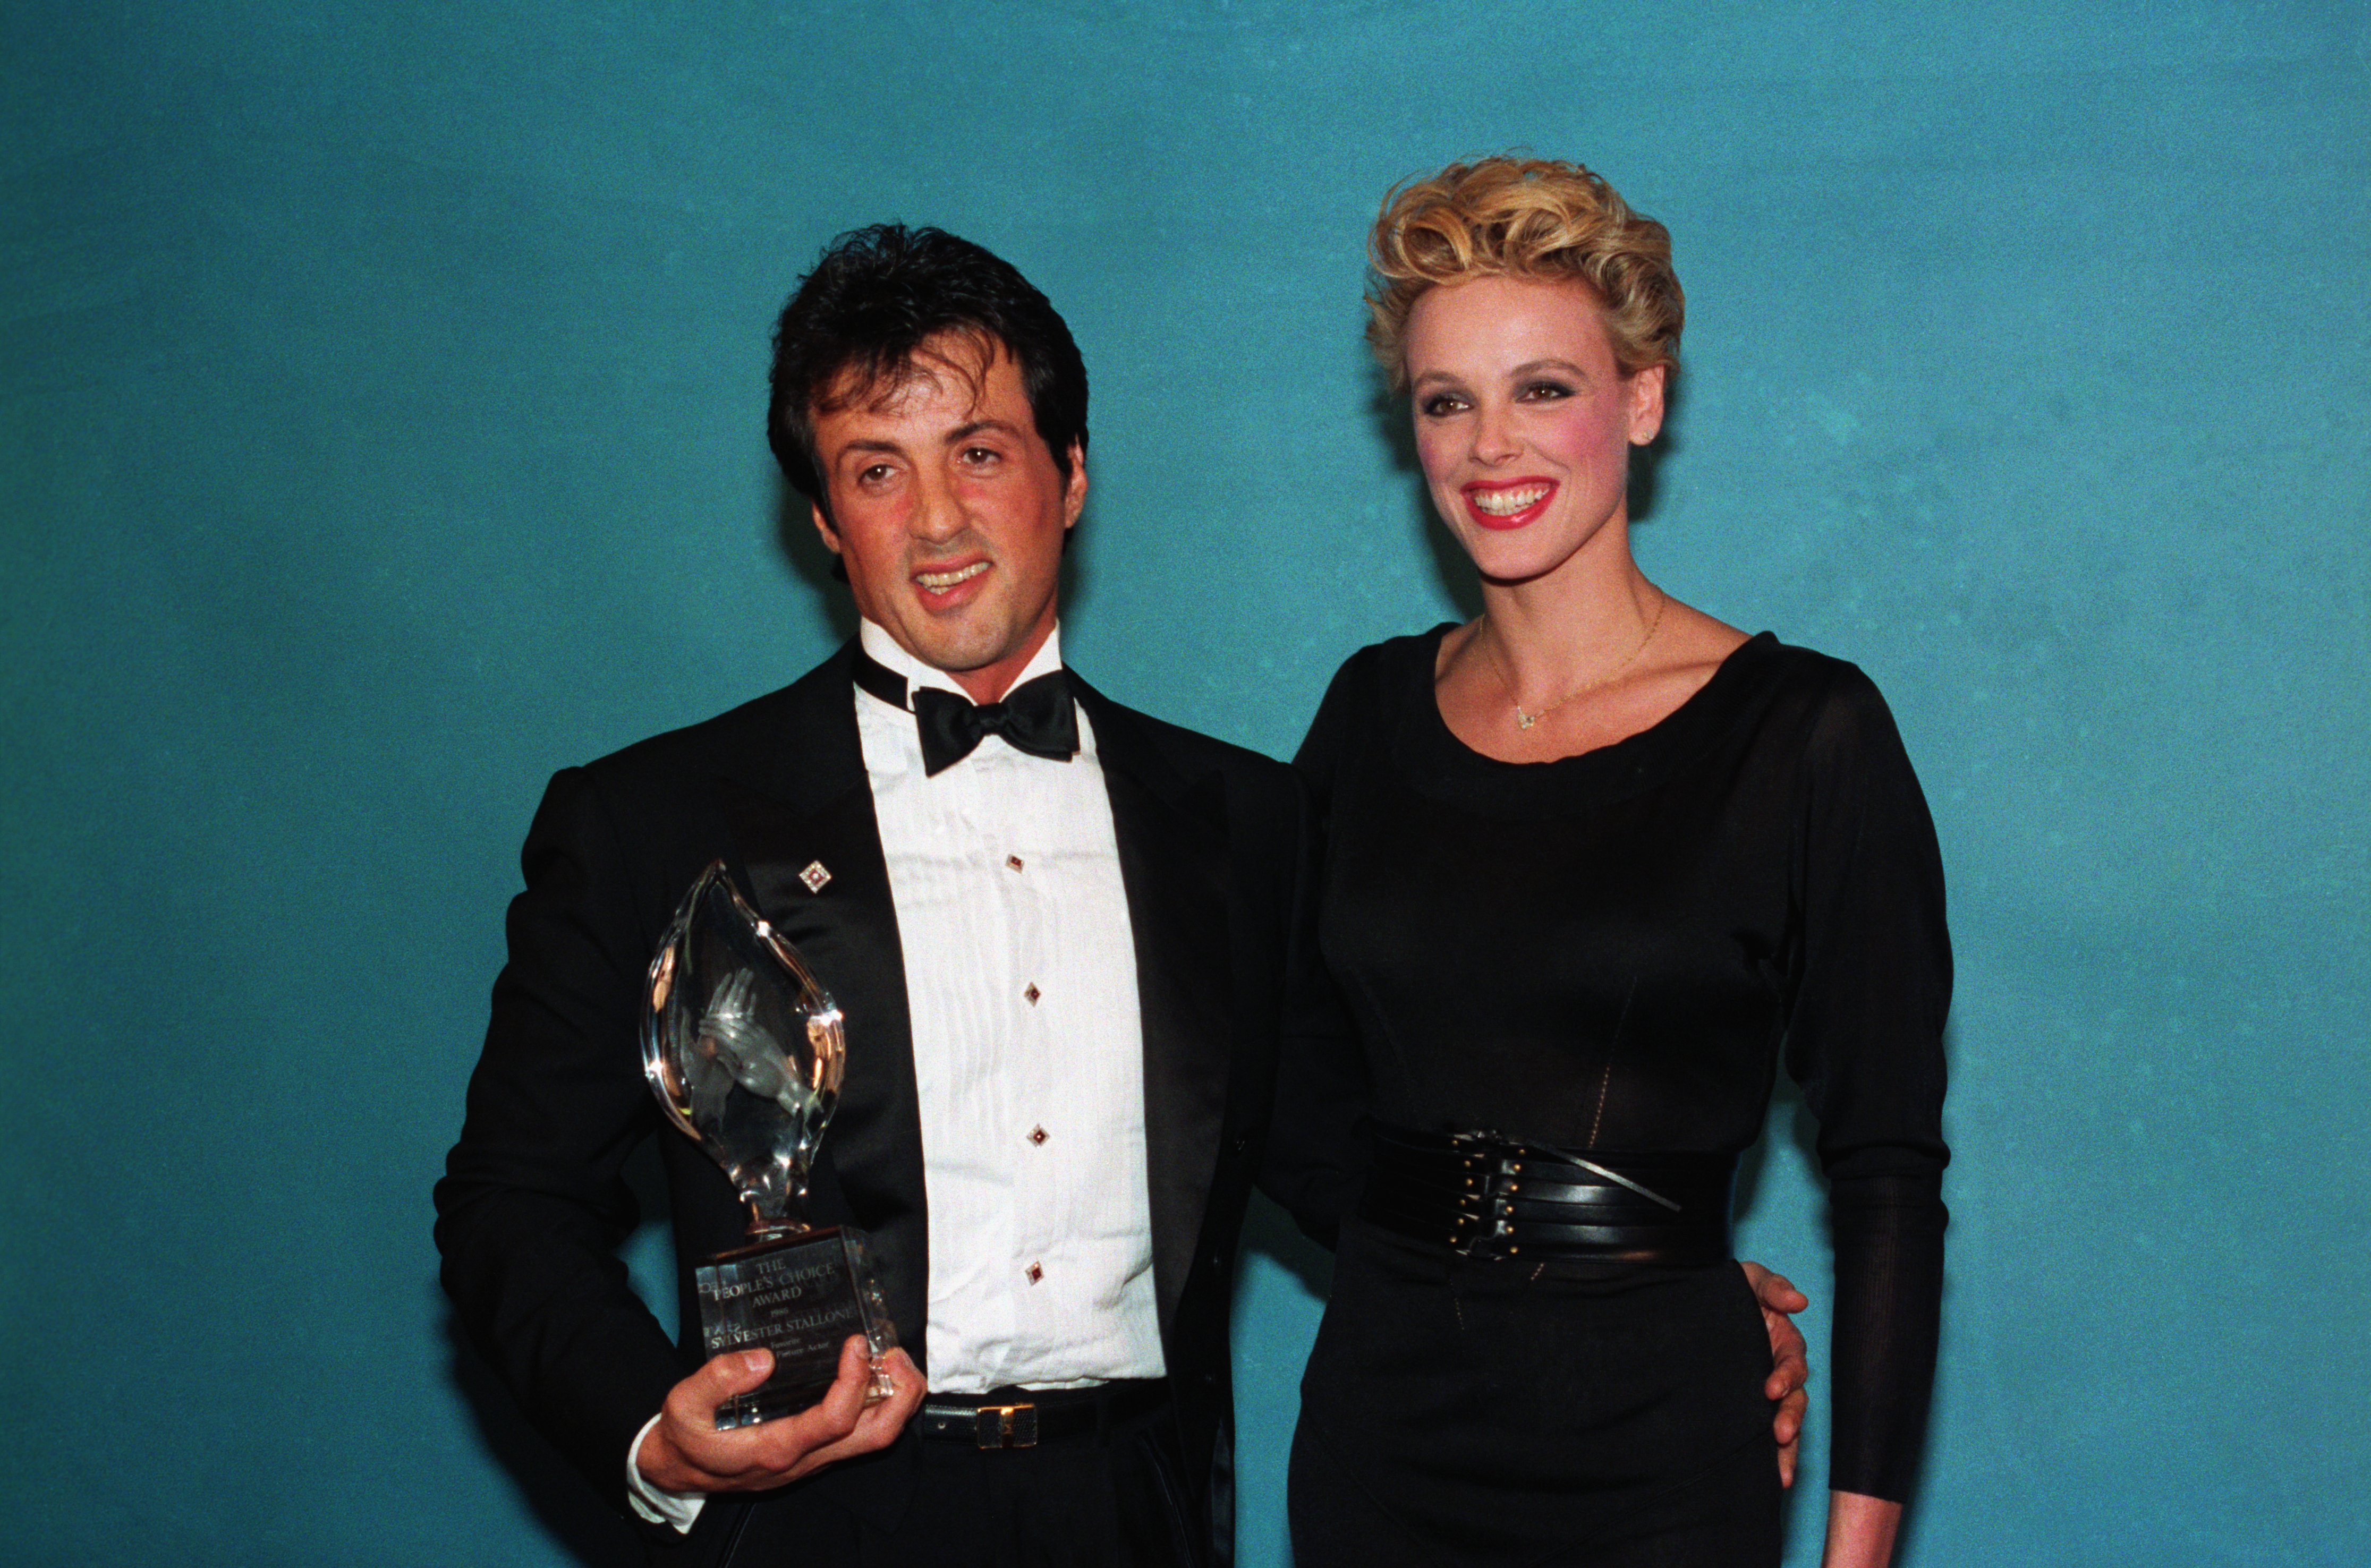 Sylvester Stallone and Brigitte Nielsen after he received his People's Choice award | Source: Getty Images